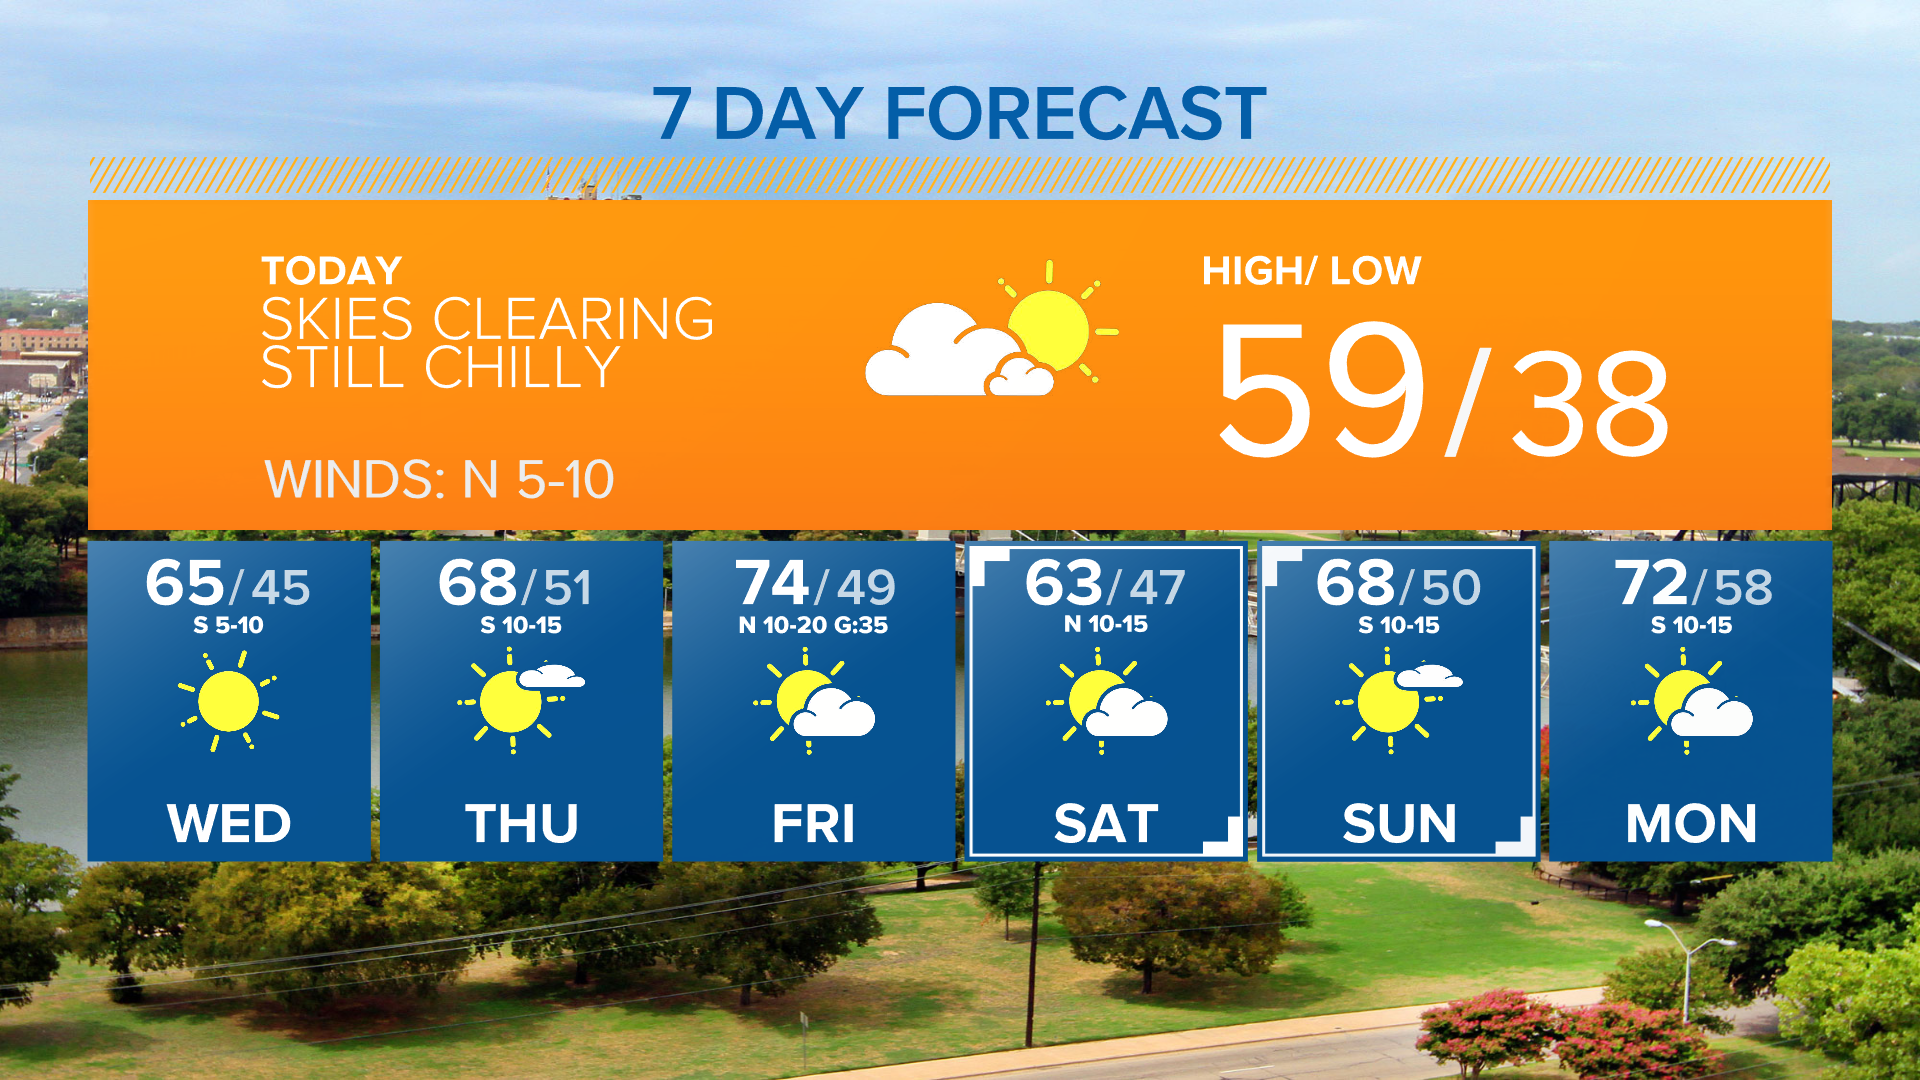 Temperatures today will top out close to 60 degrees, but we'll be in the mid-70's on Friday.